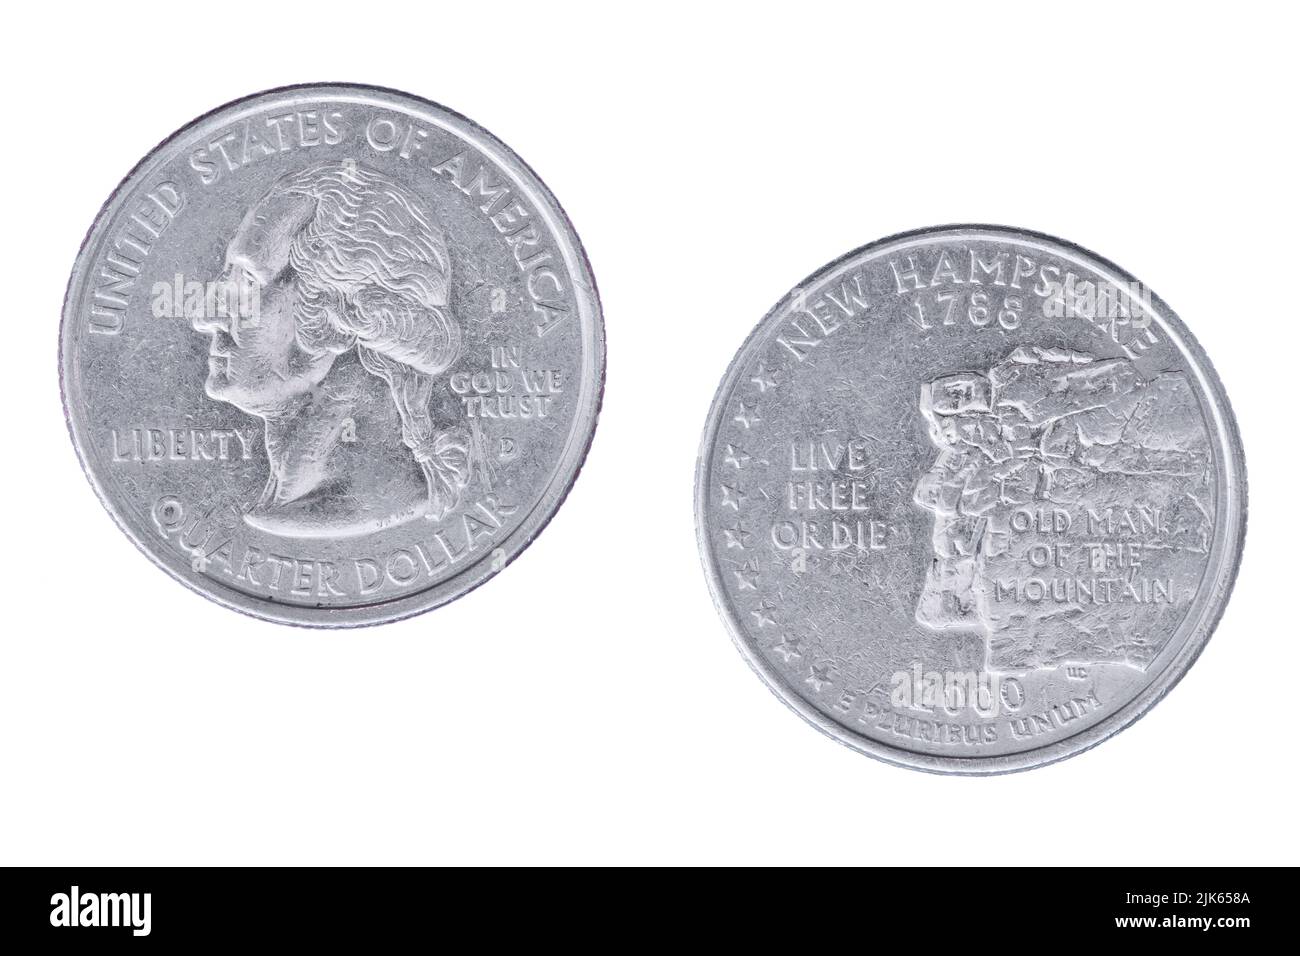 Obverse and reverse sides of the New Hampshire 2000D State Commemorative Quarter isolated on a white background Stock Photo